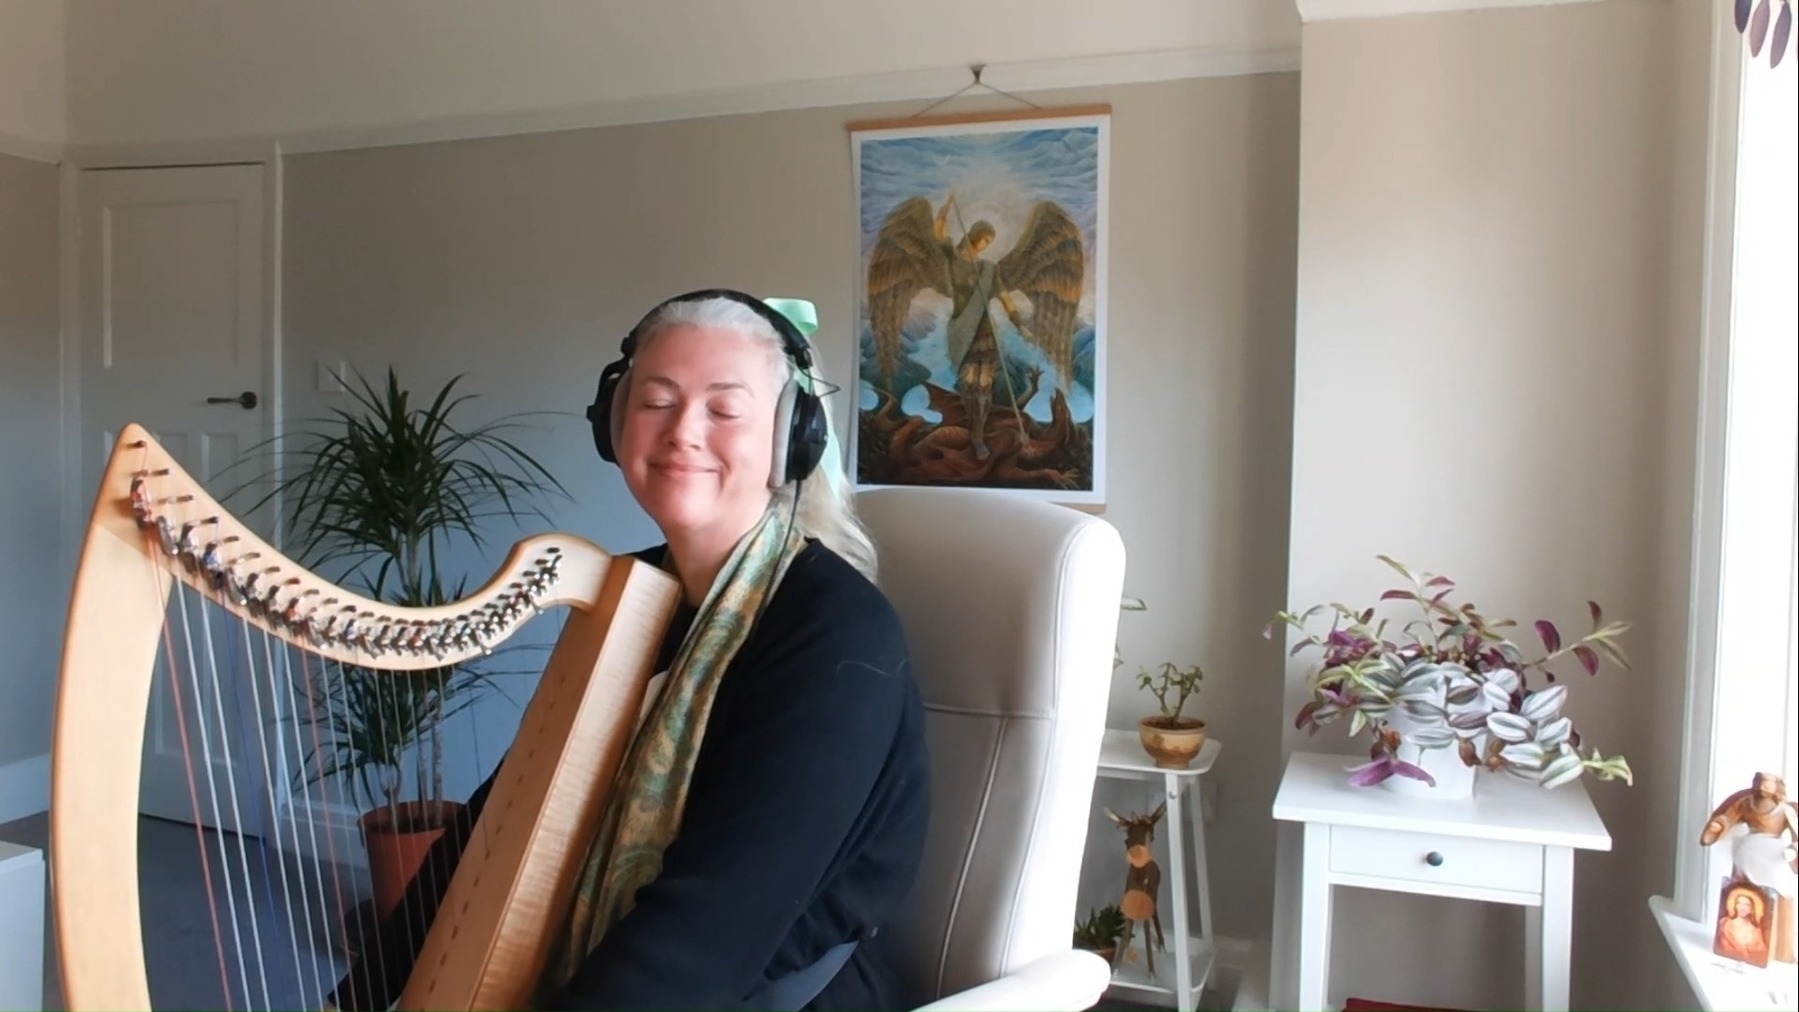 Holly holding her harp in her new studio filled with plants and a painting of Saint Michael on the wall behind her